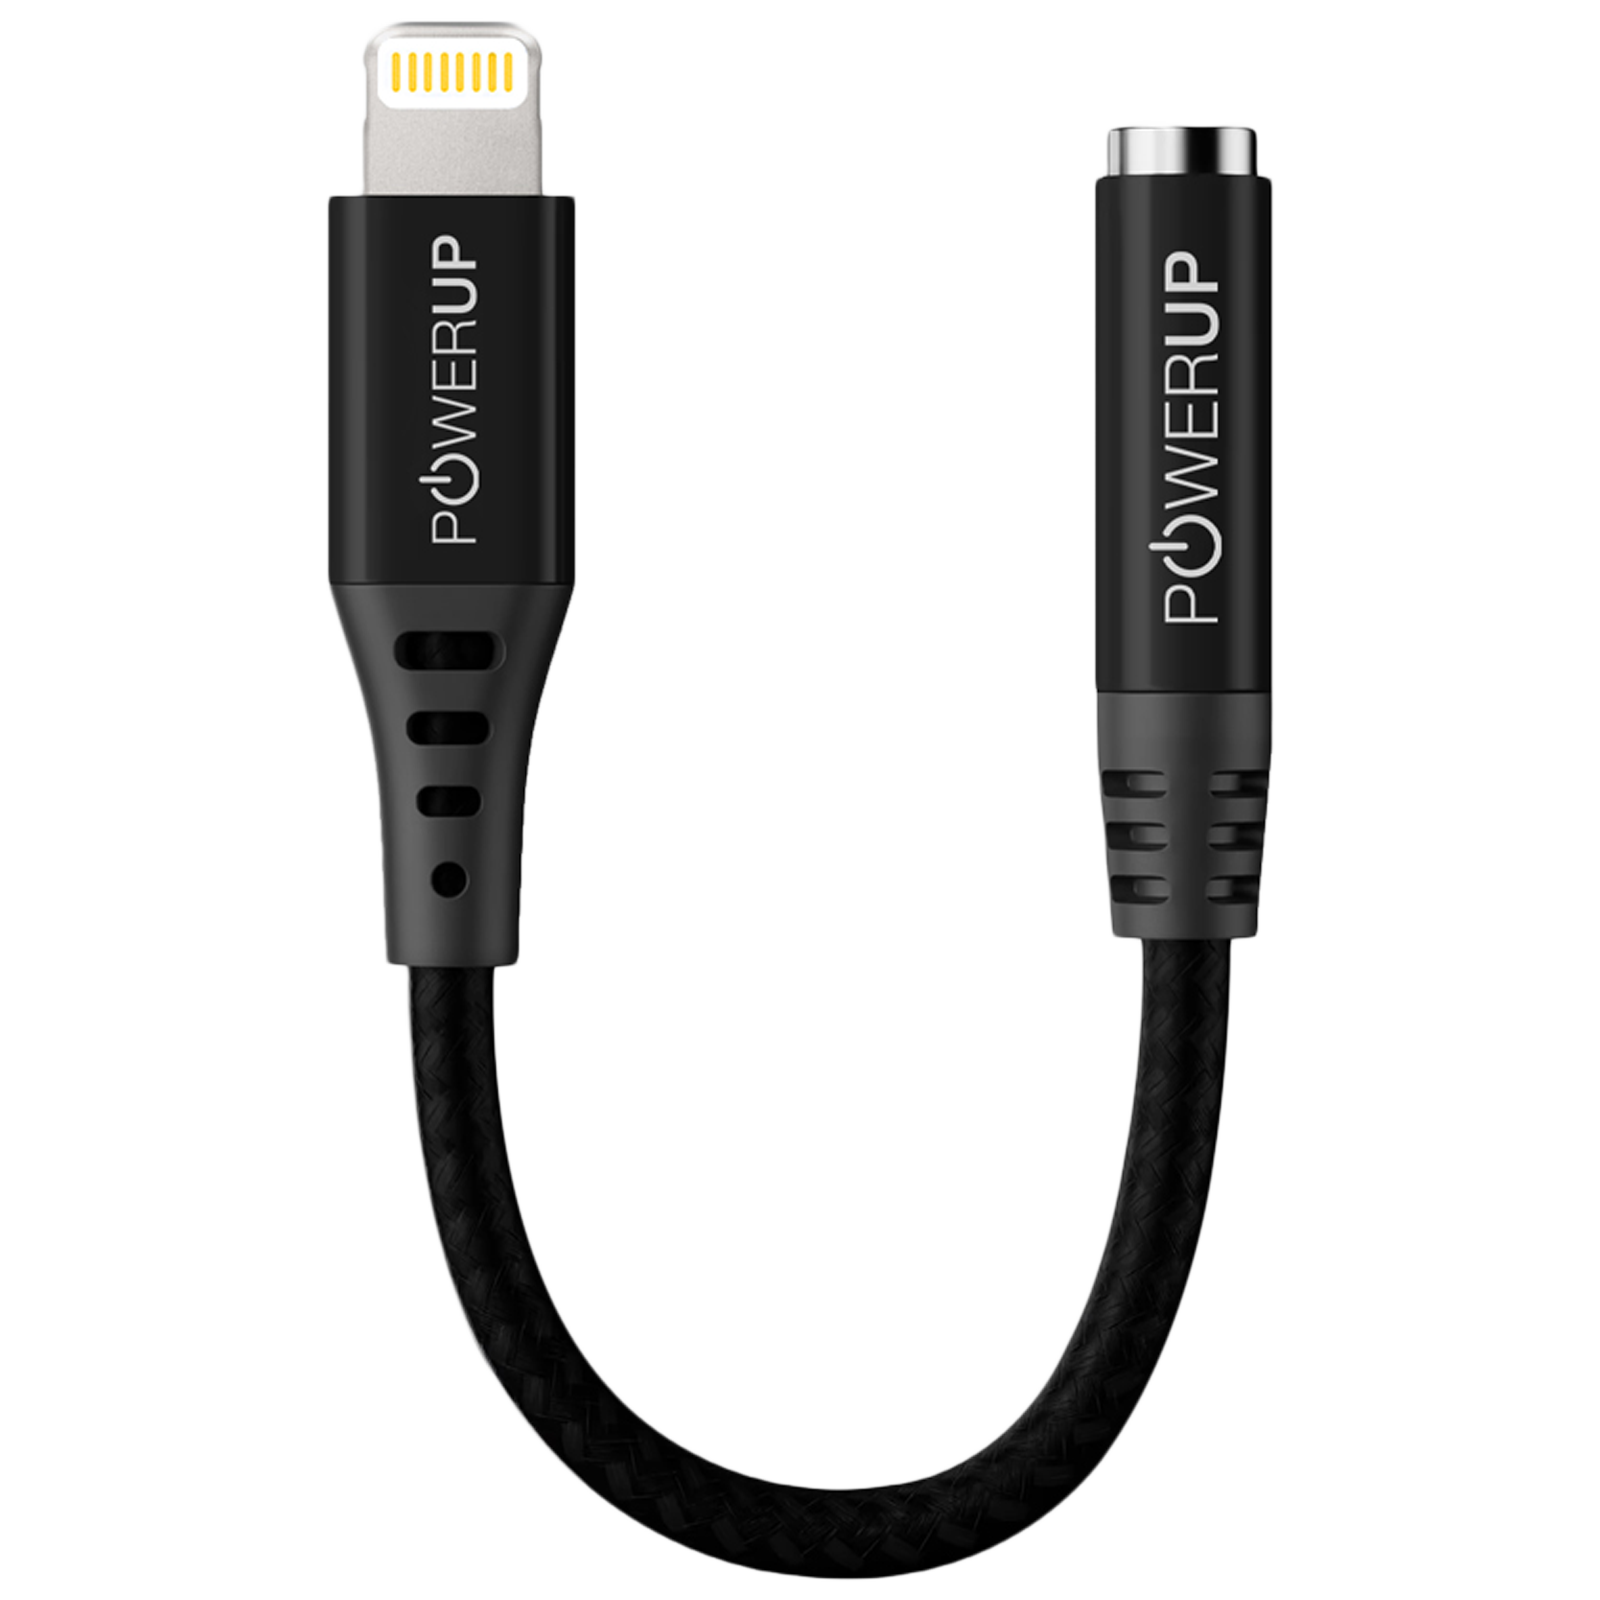 PowerUp Lightning Connector to 3.5mm Stereo Audio Aux Cable (Digital to Analog Converter Chip, PUP-LTA-12BK, Black)